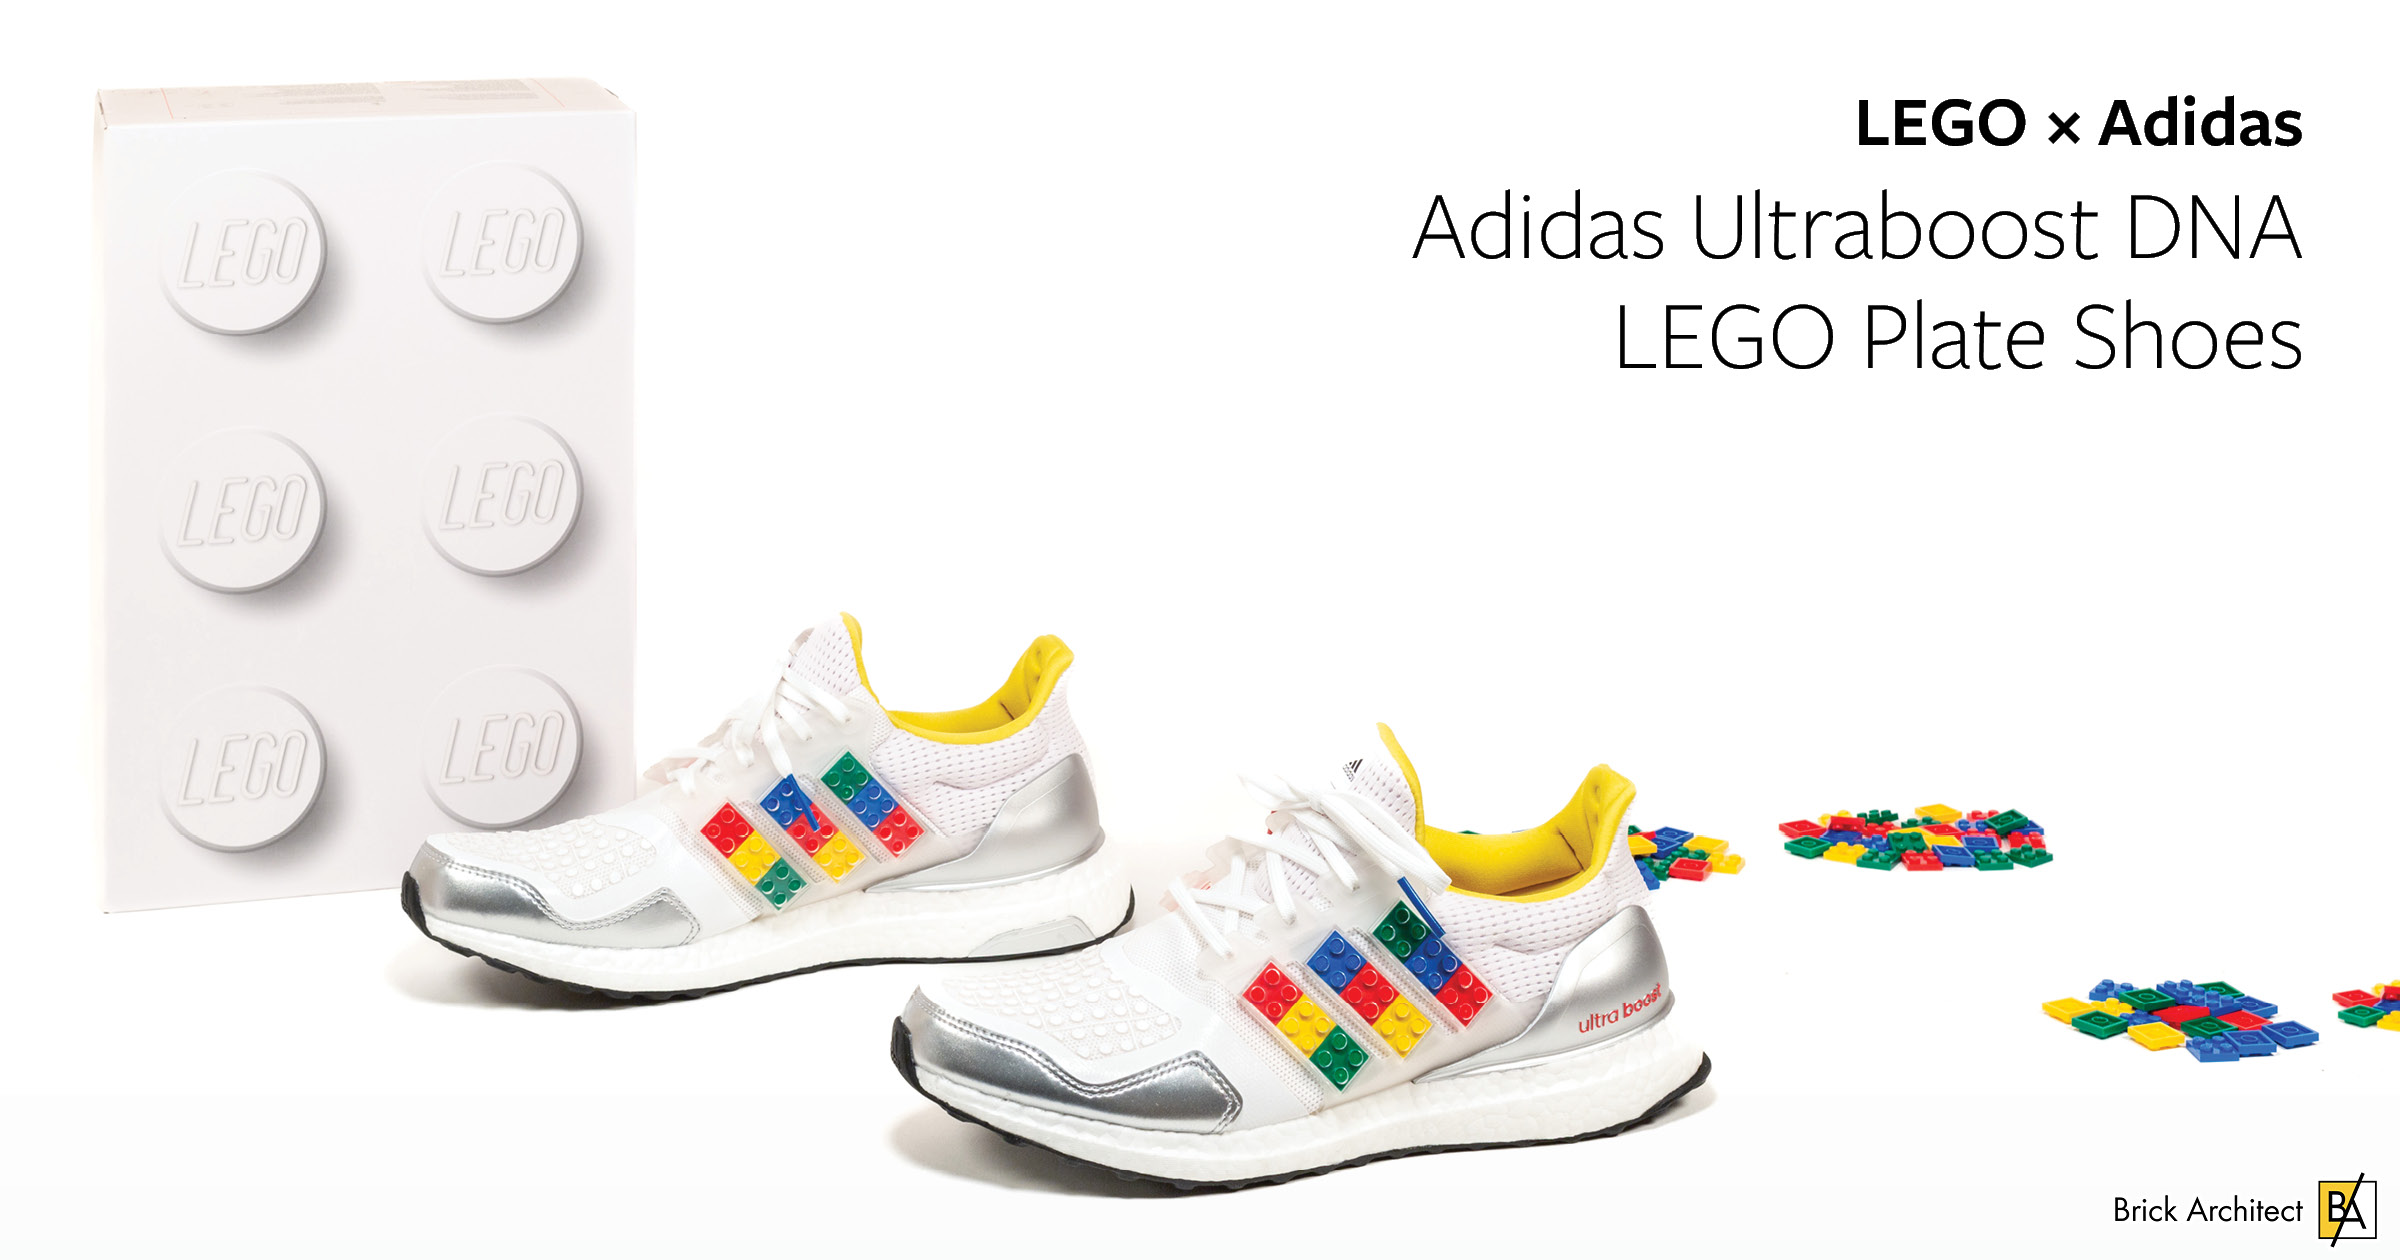 Adidas Ultraboost DNA × LEGO Plates Shoes are LEGO Compatible — with some important caveats.